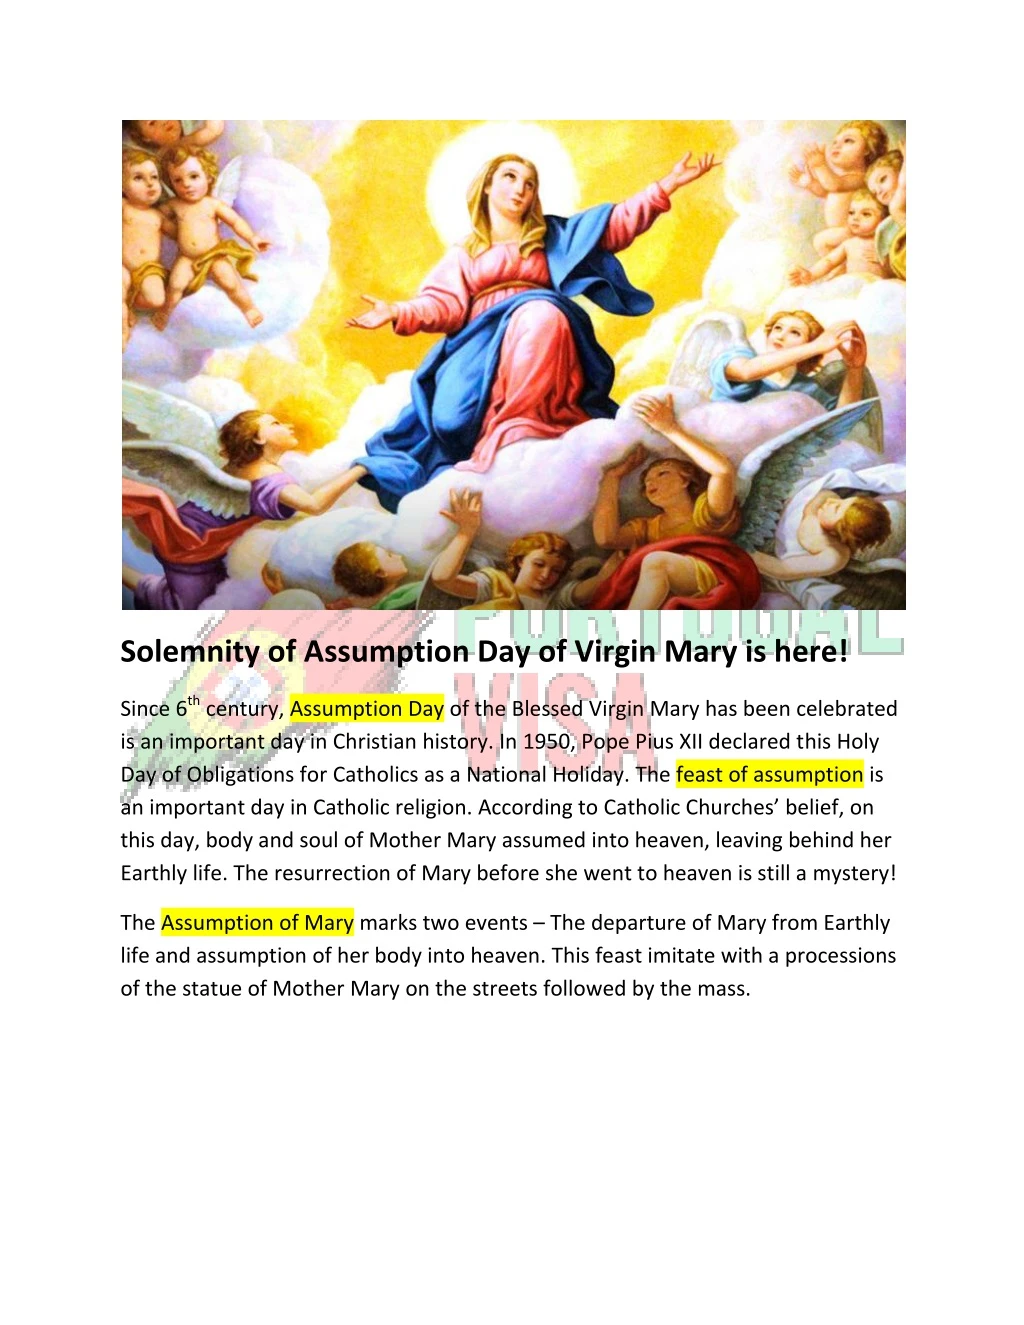 solemnity of assumption day of virgin mary is here